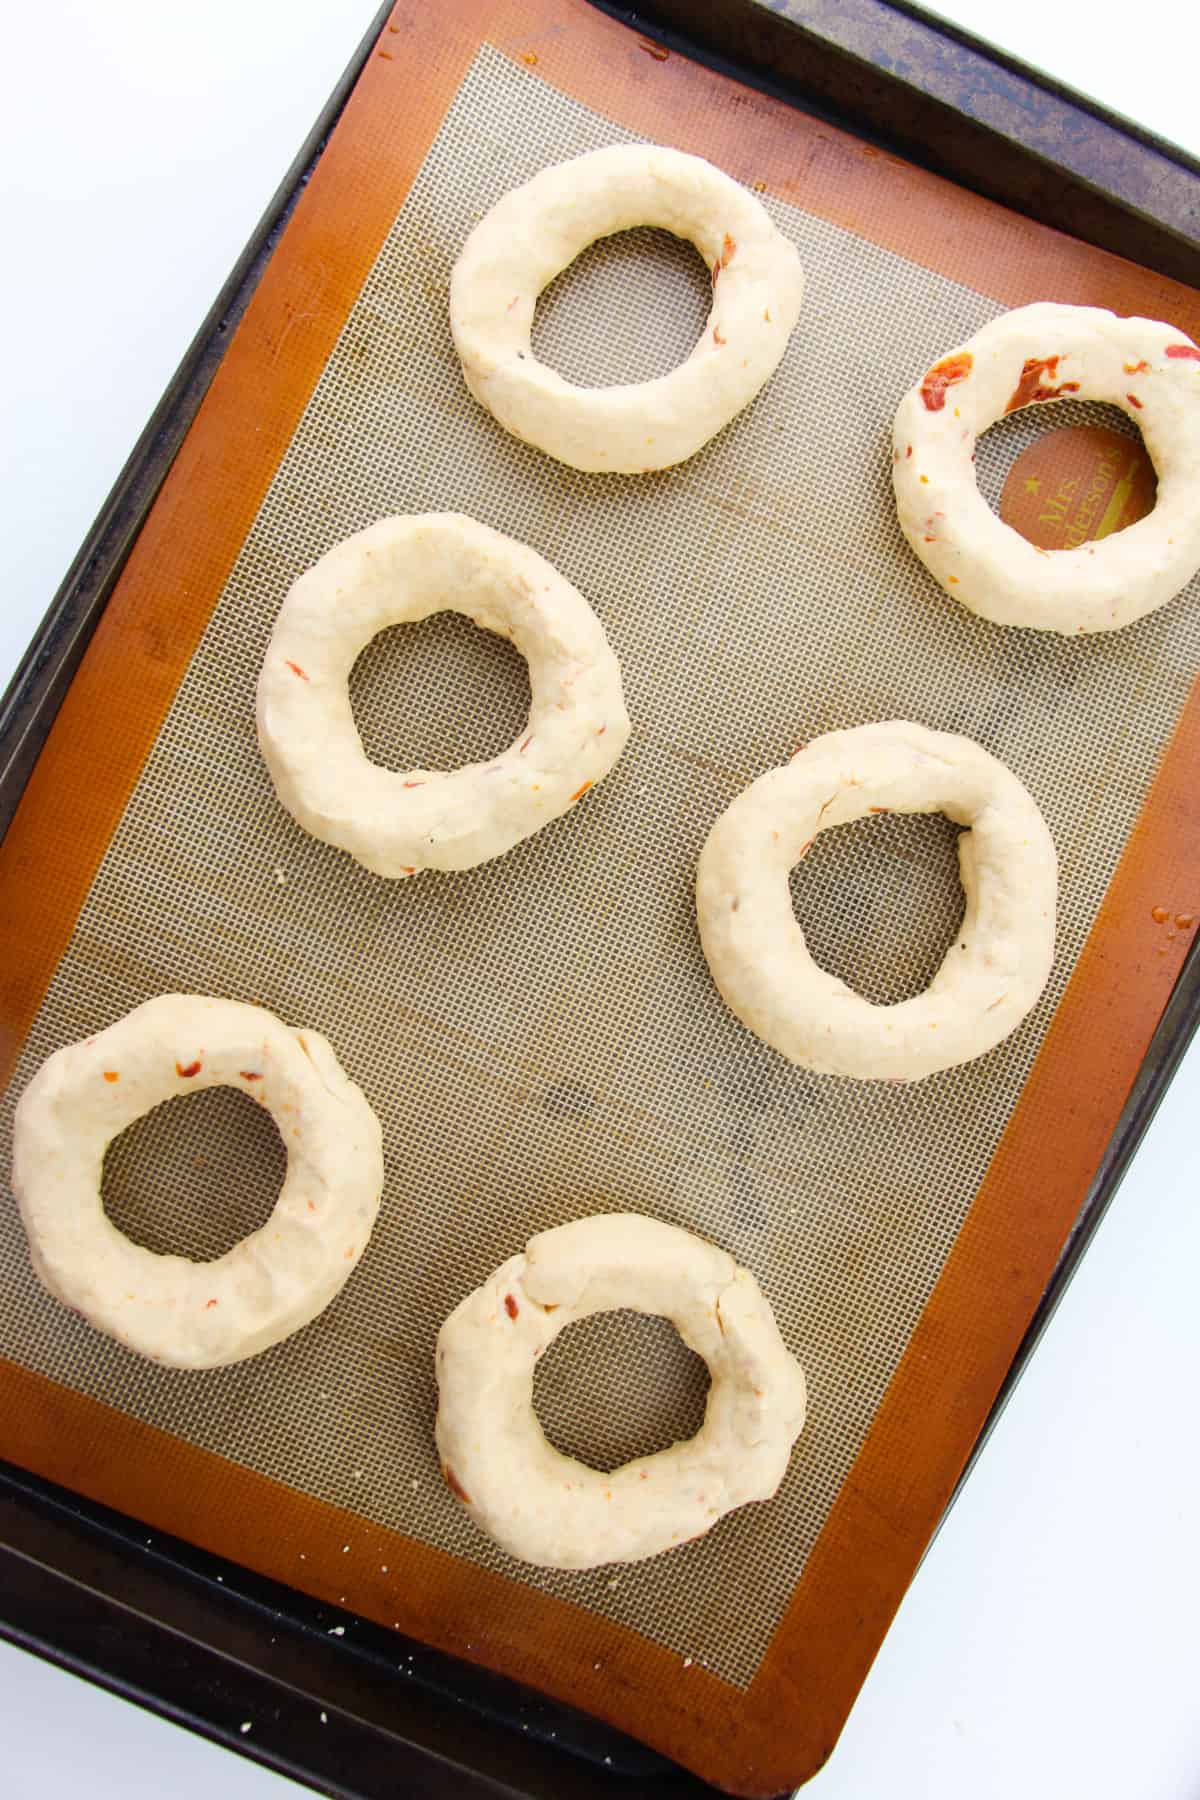 dough shaped into bagels.